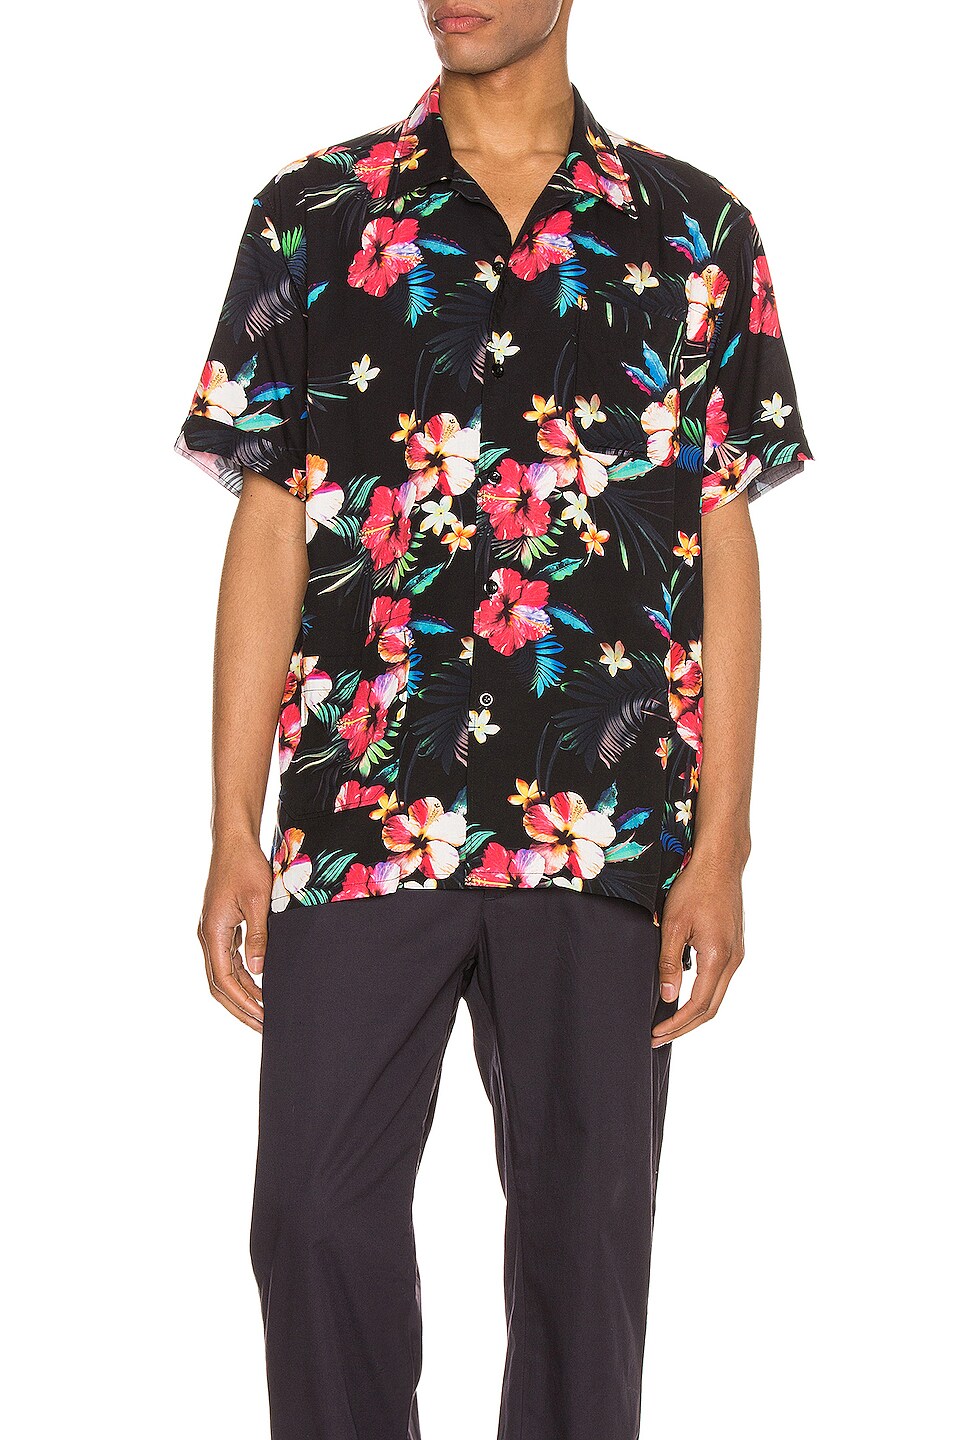 Image 1 of Engineered Garments Camp Shirt in Black Tropical Floral Print Rayon